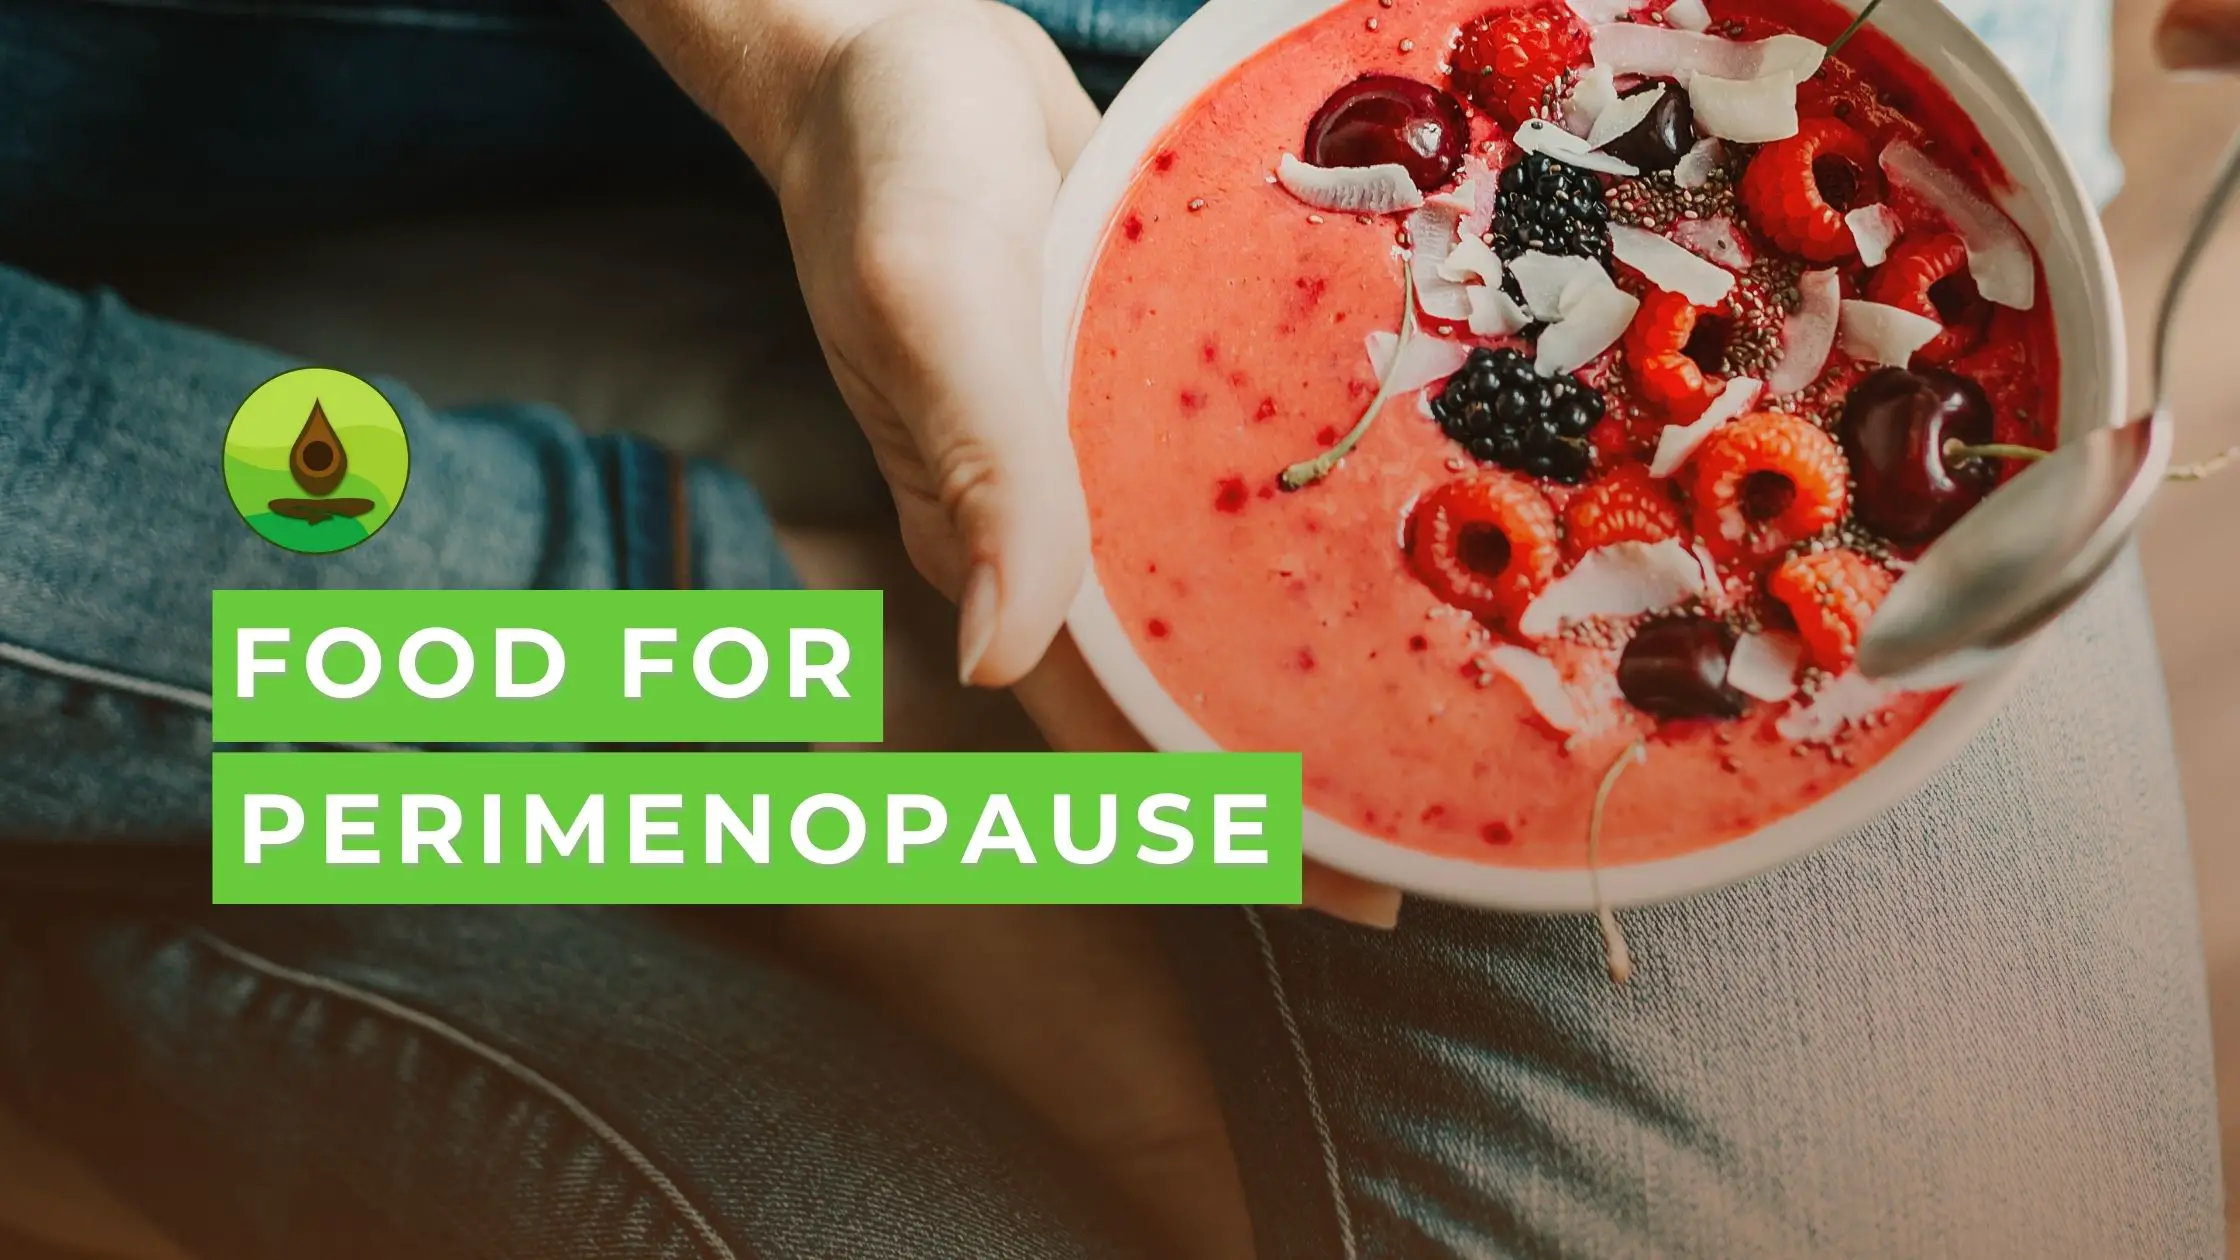 FOOD FOR PERIMENOPAUSE